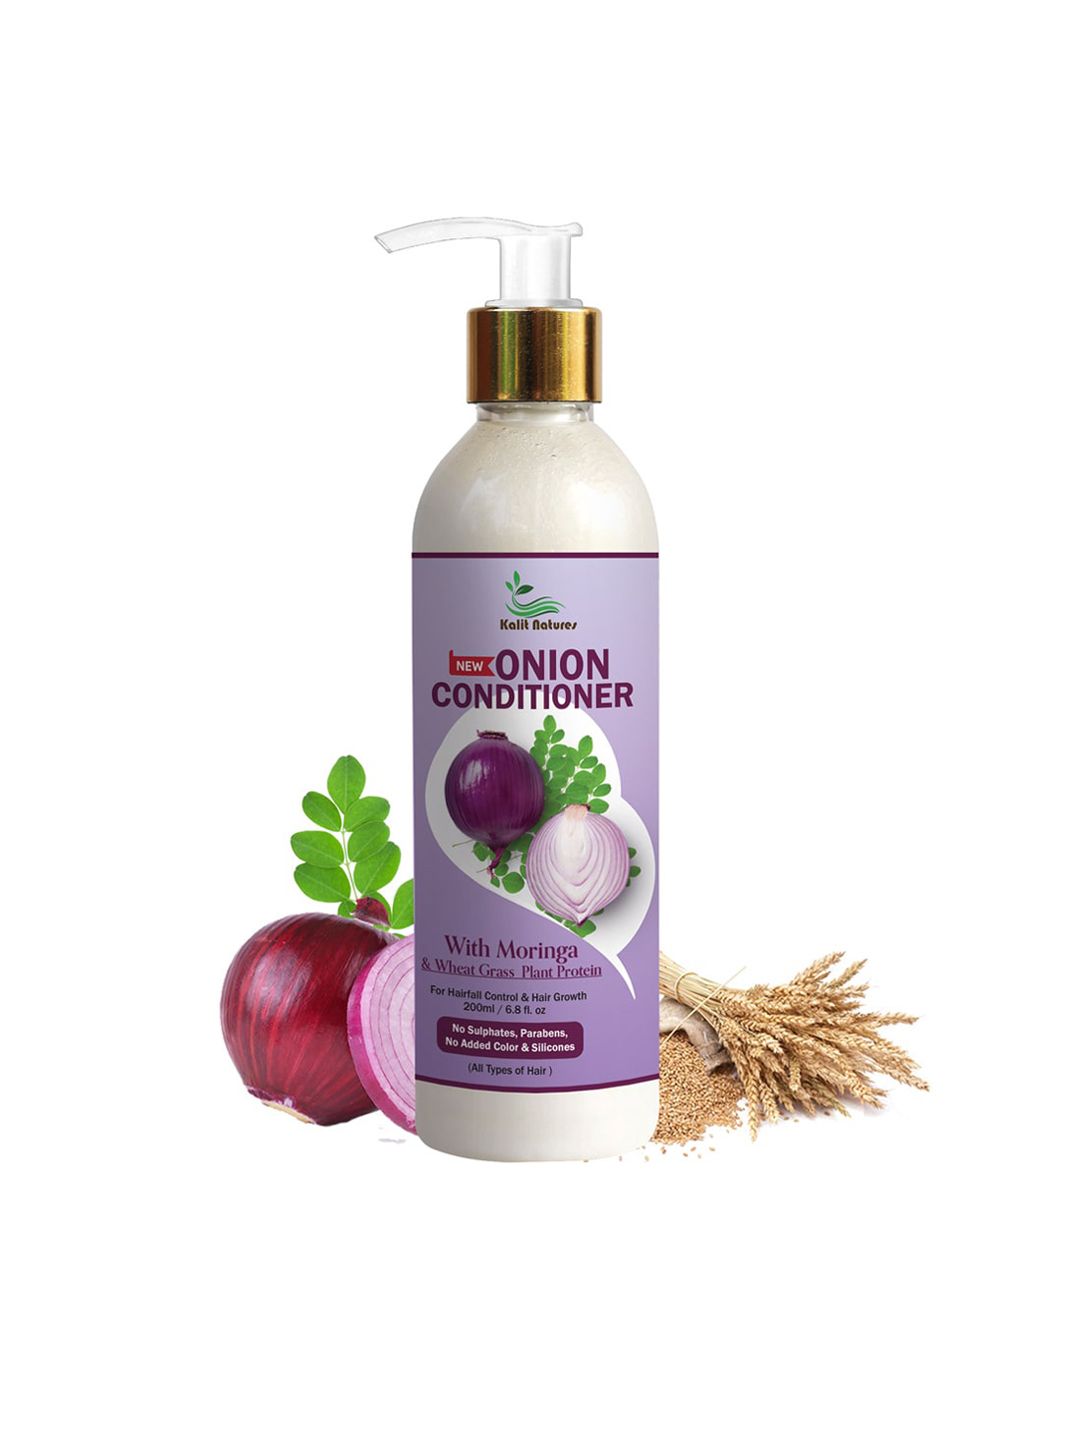 Kalit Natures Onion Conditioner with Moringa & Wheat Grass For Hairfall Control - 200ml Price in India